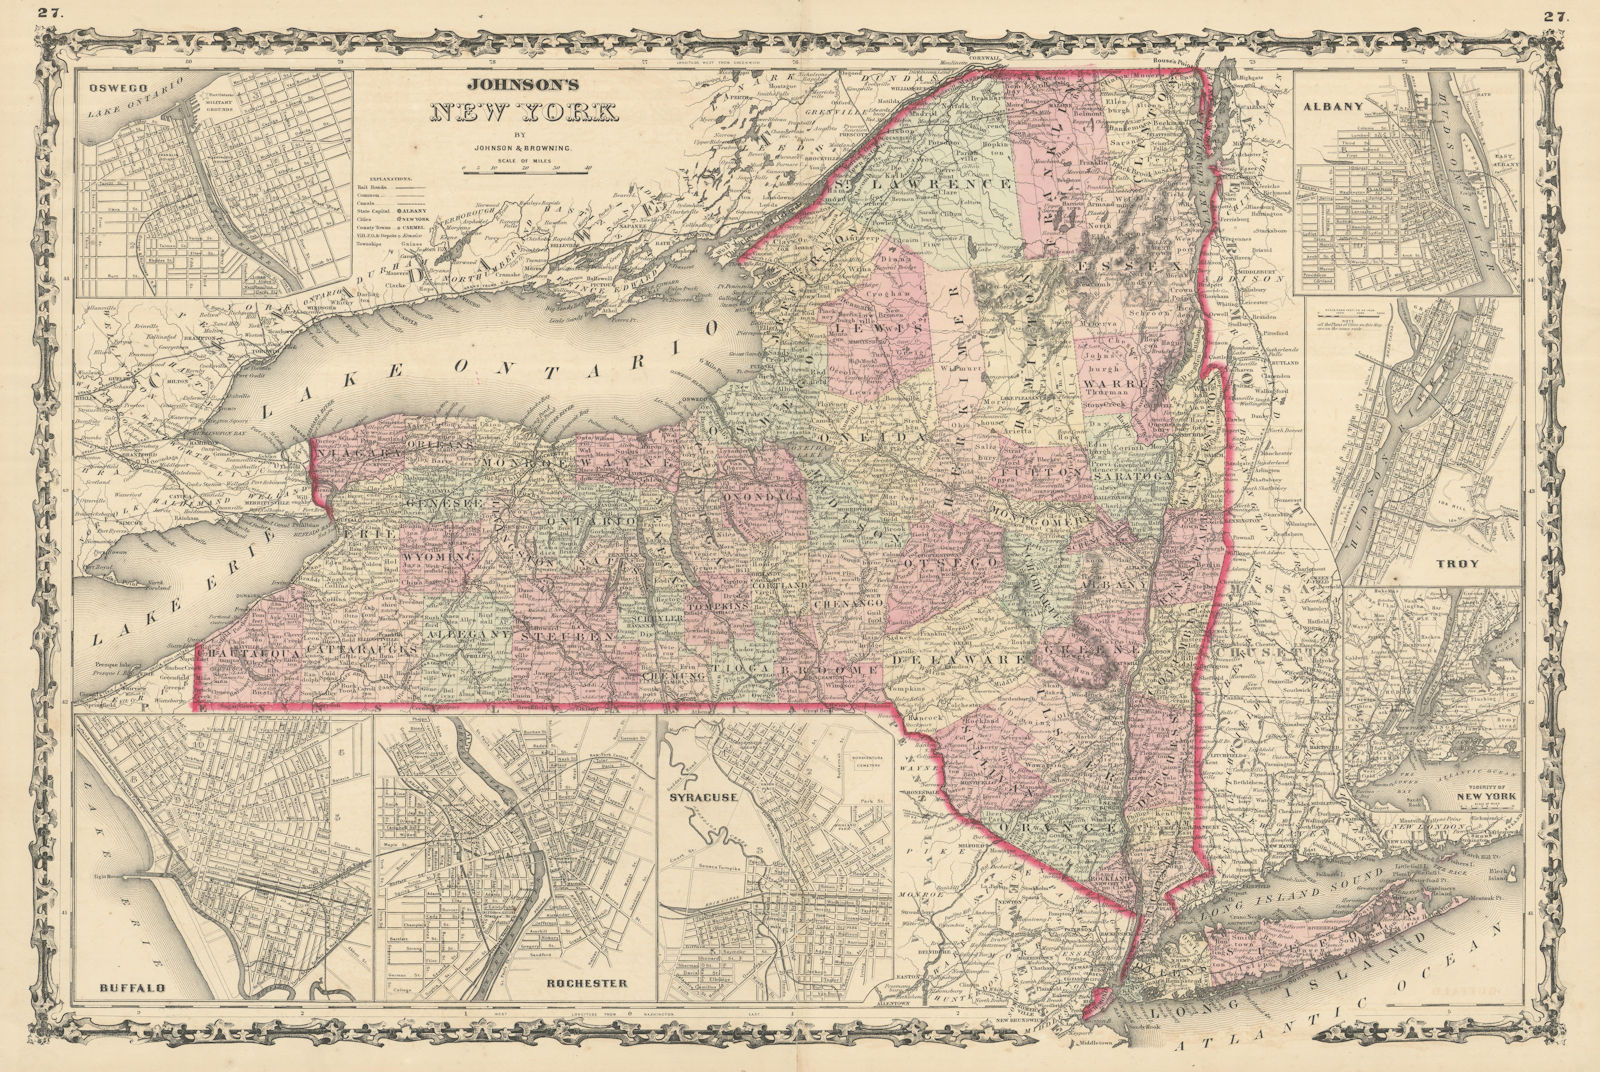 Associate Product Johnson's New York state map. Albany Troy Rochester Buffalo Syracuse 1861